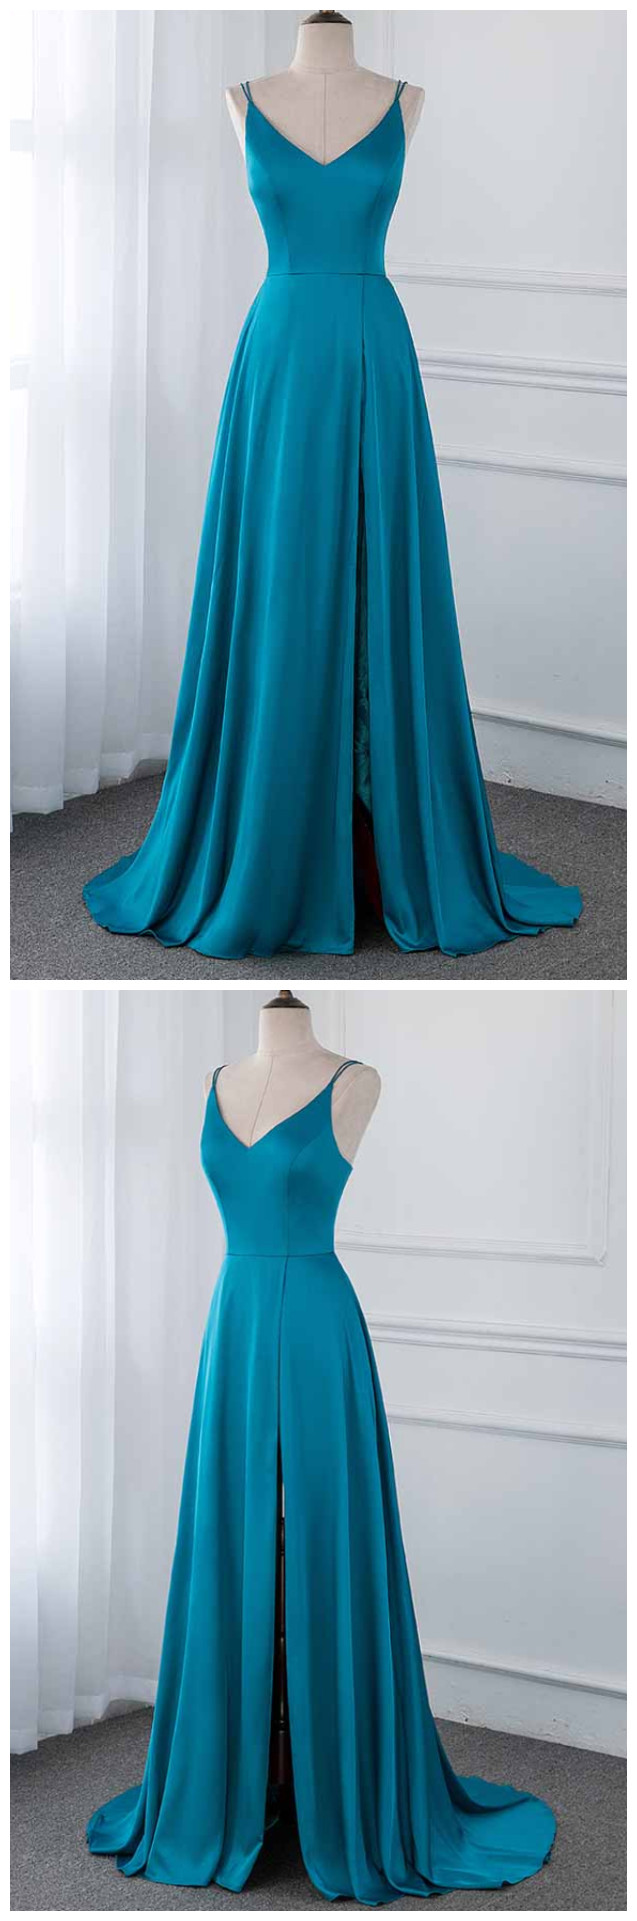 Fashion Fux 220 Emerald Silk Satin Long Prom Dresses Backless Formal Women Evening Gown